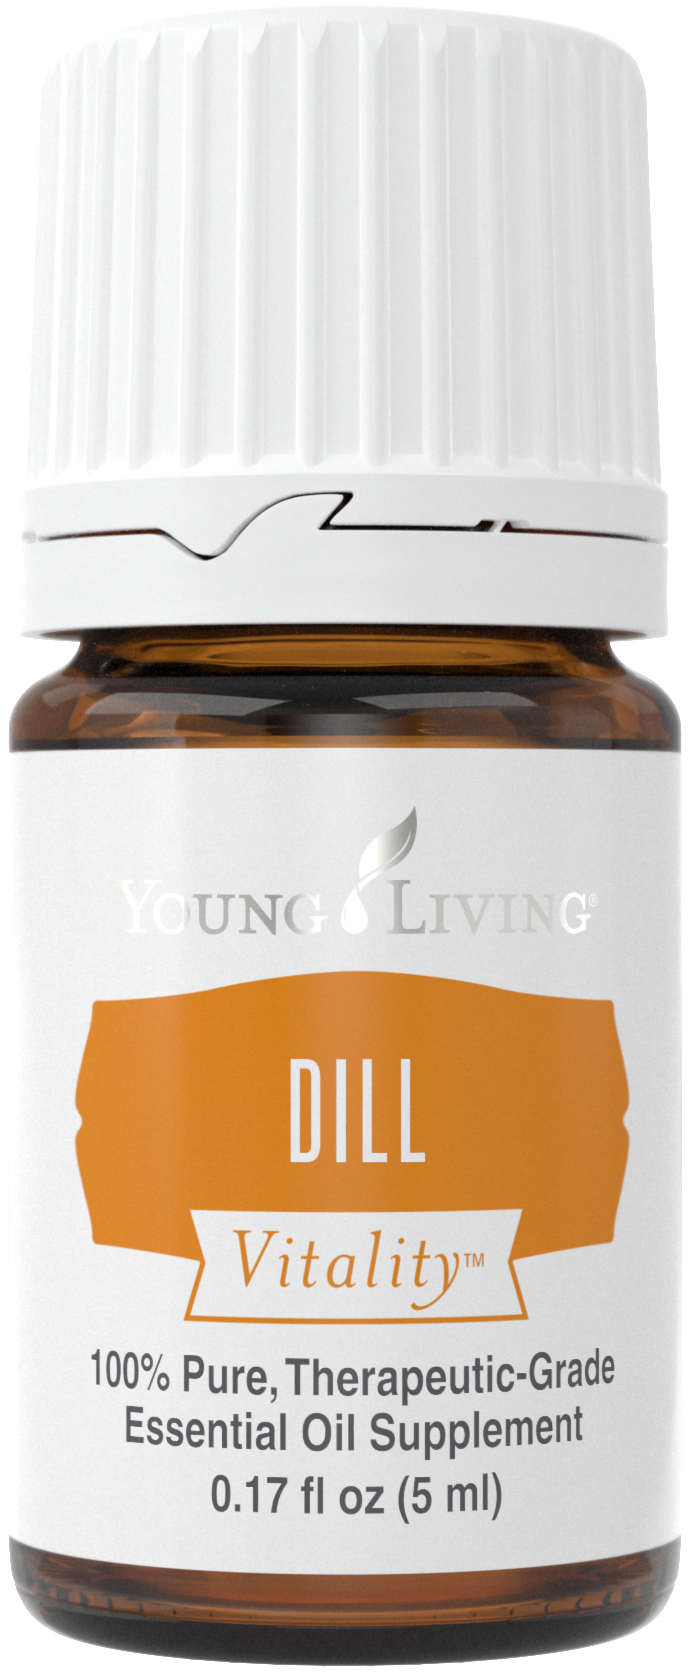 Dill Vitality Silo.png